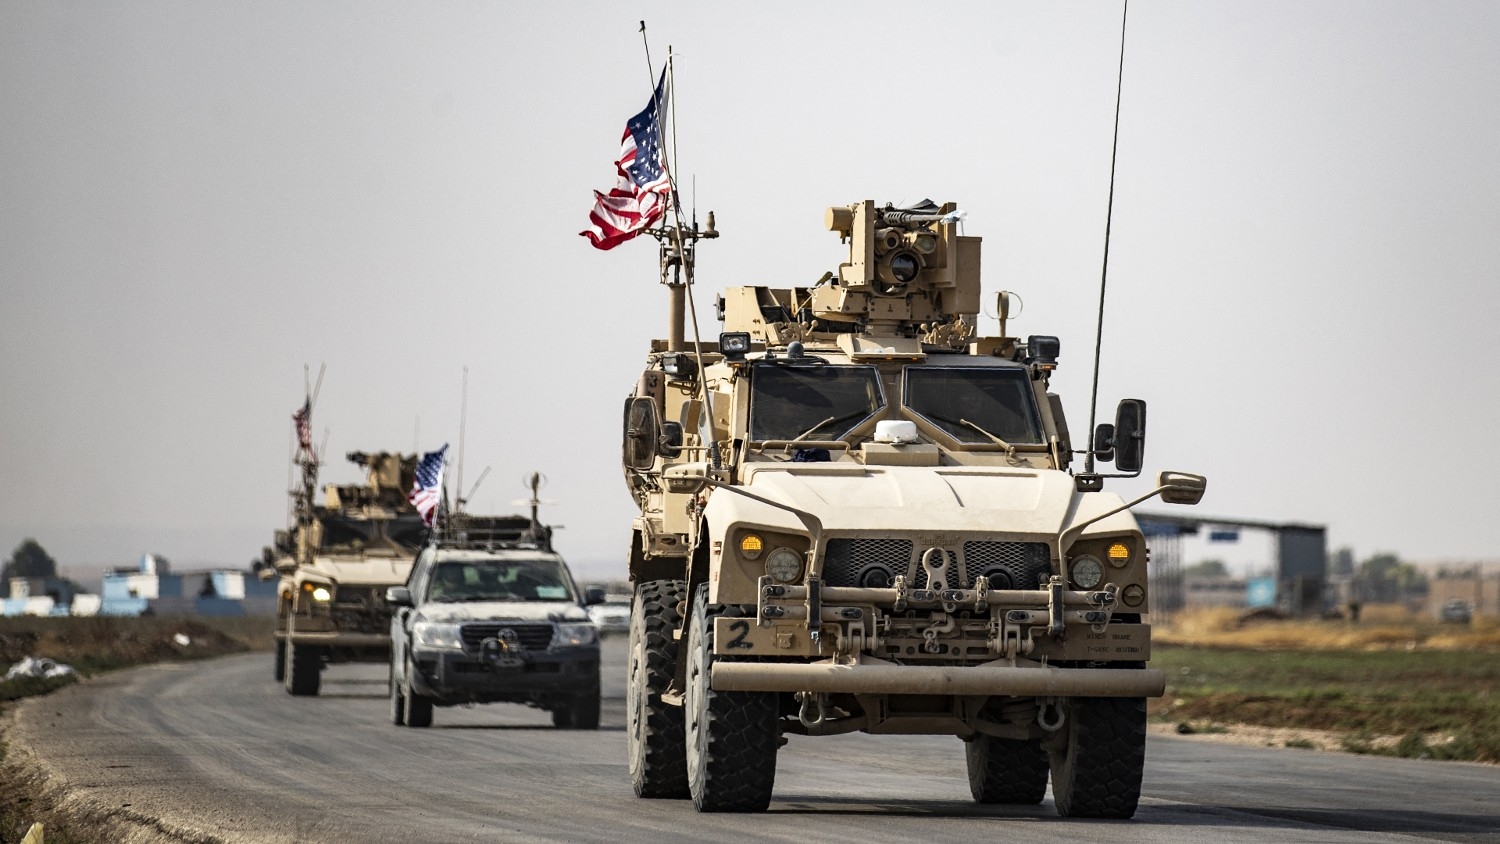 US military vehicles drive on a road after US forces pulled out of their base in the Northern Syrian town of Tal Tamr on 20 October 2019.